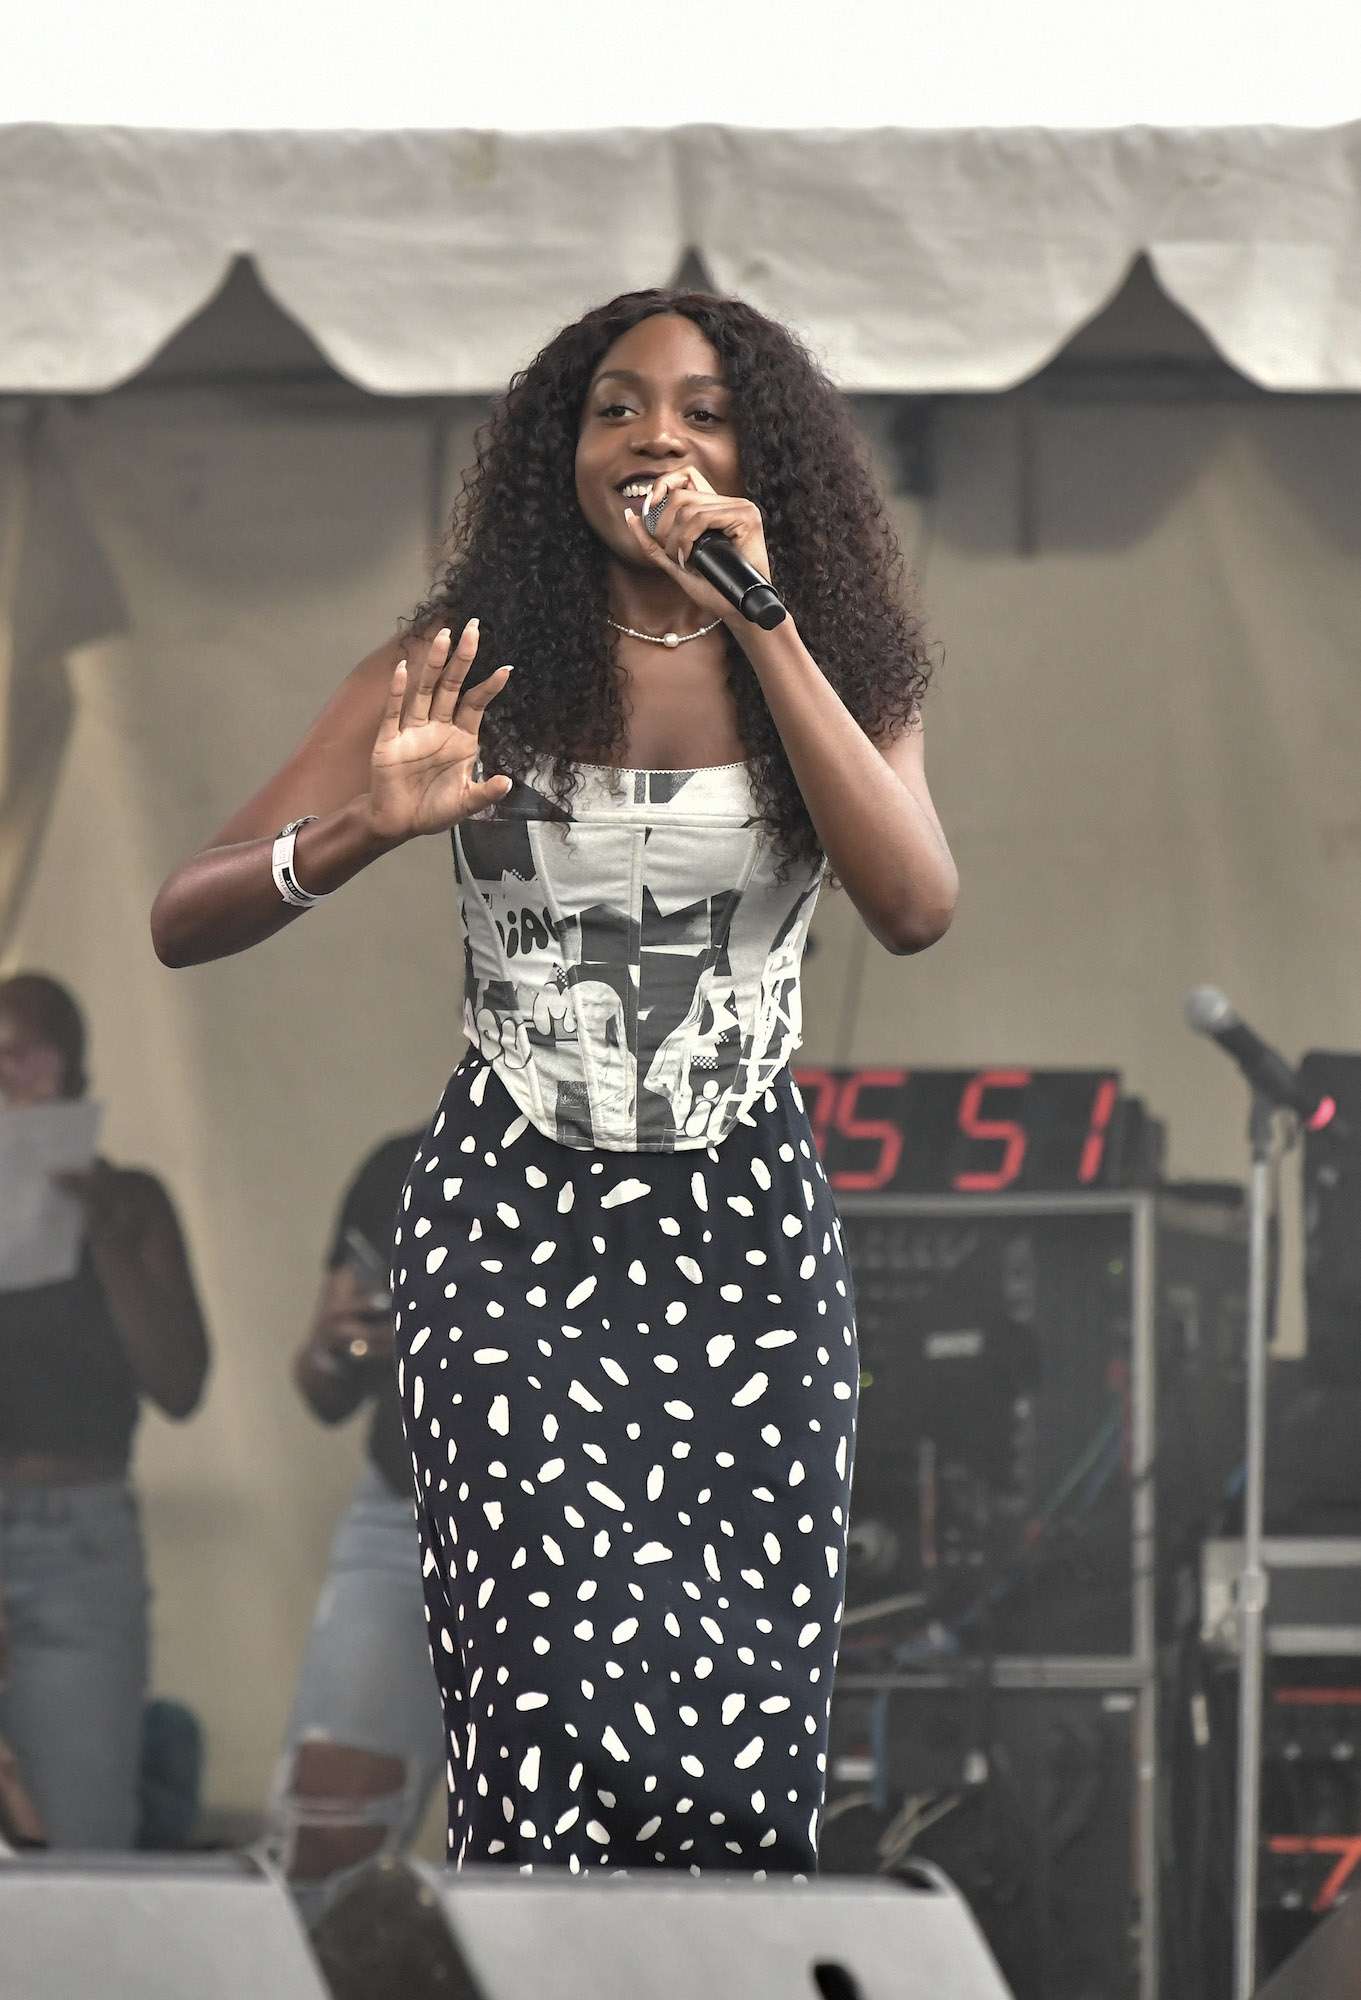 Noname Live At Pitchfork [GALLERY] 4